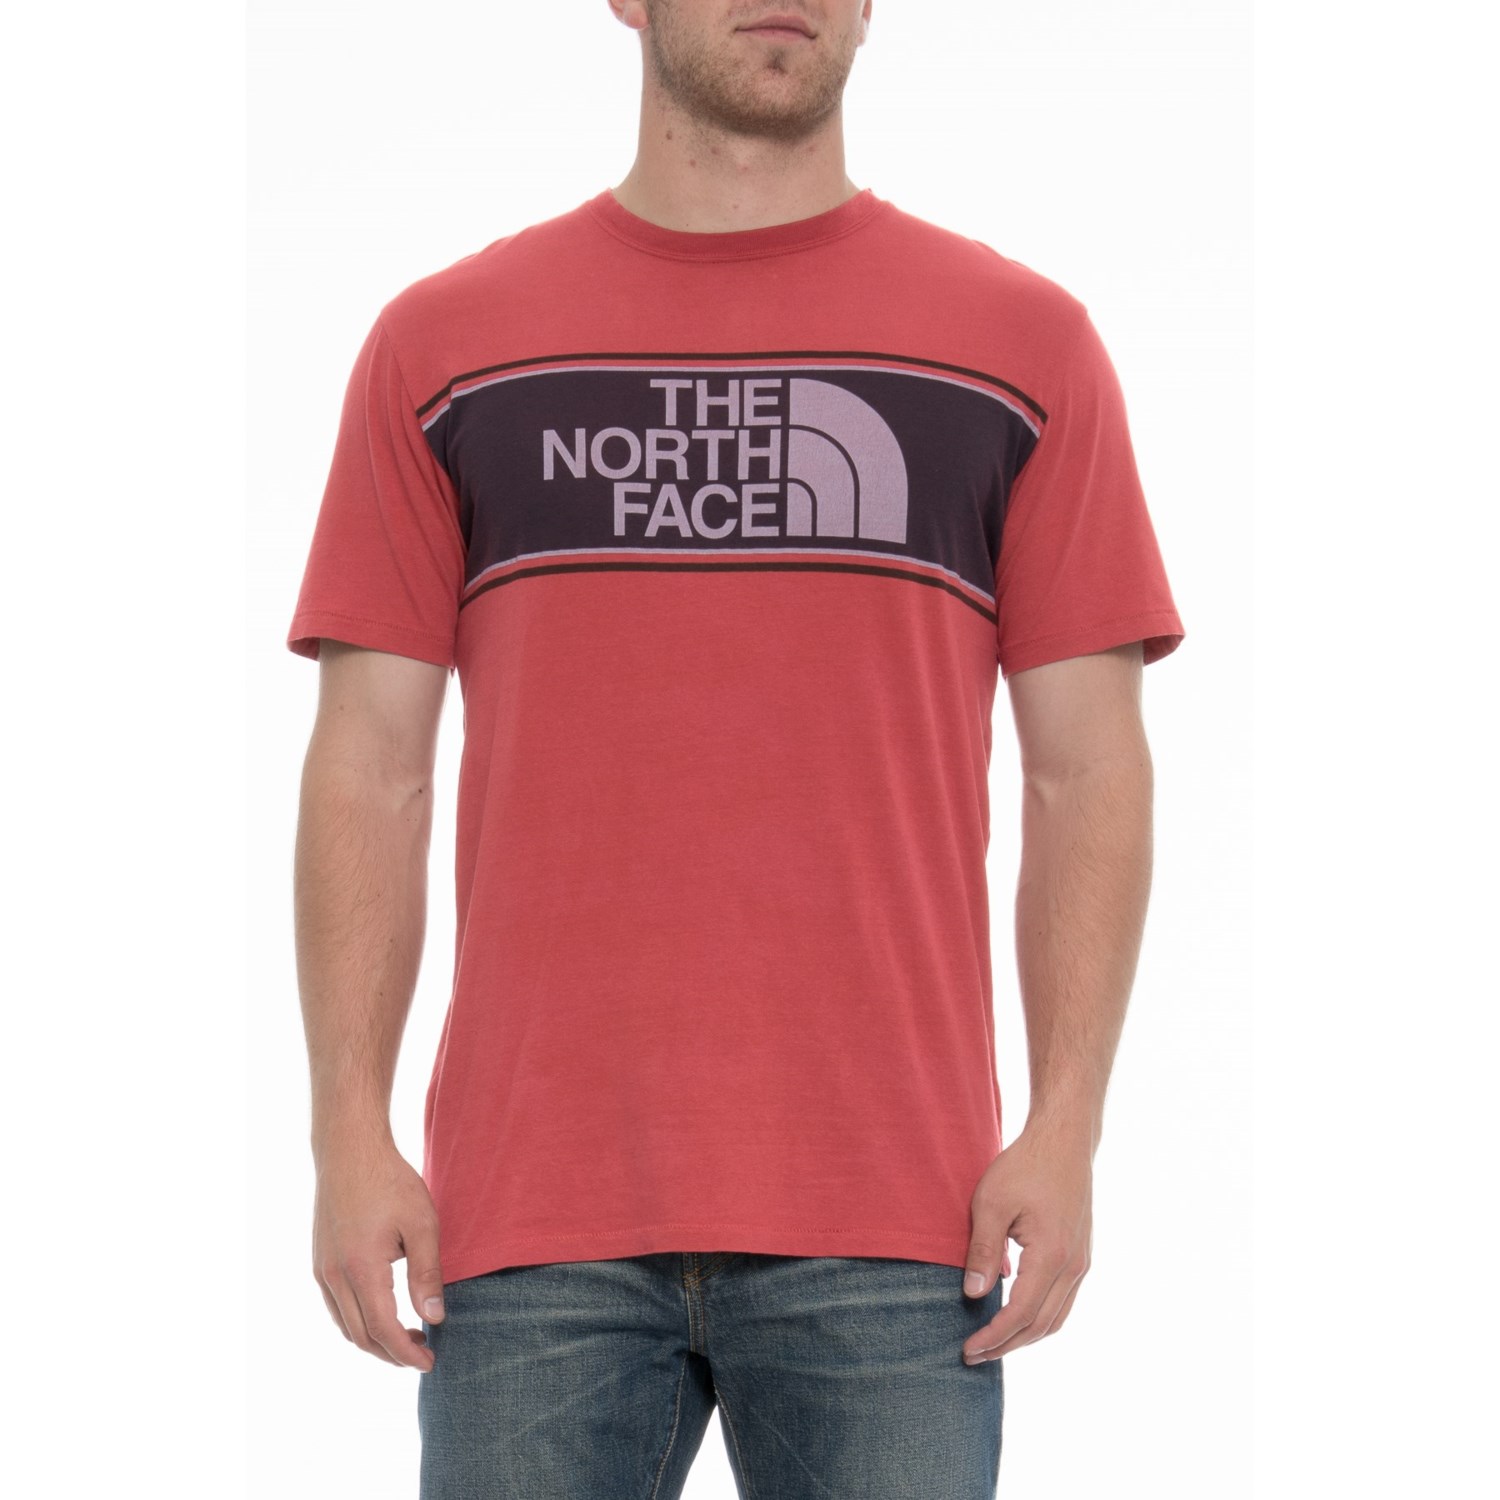 The North Face Edge to Edge T-Shirt – Short Sleeve (For Men)